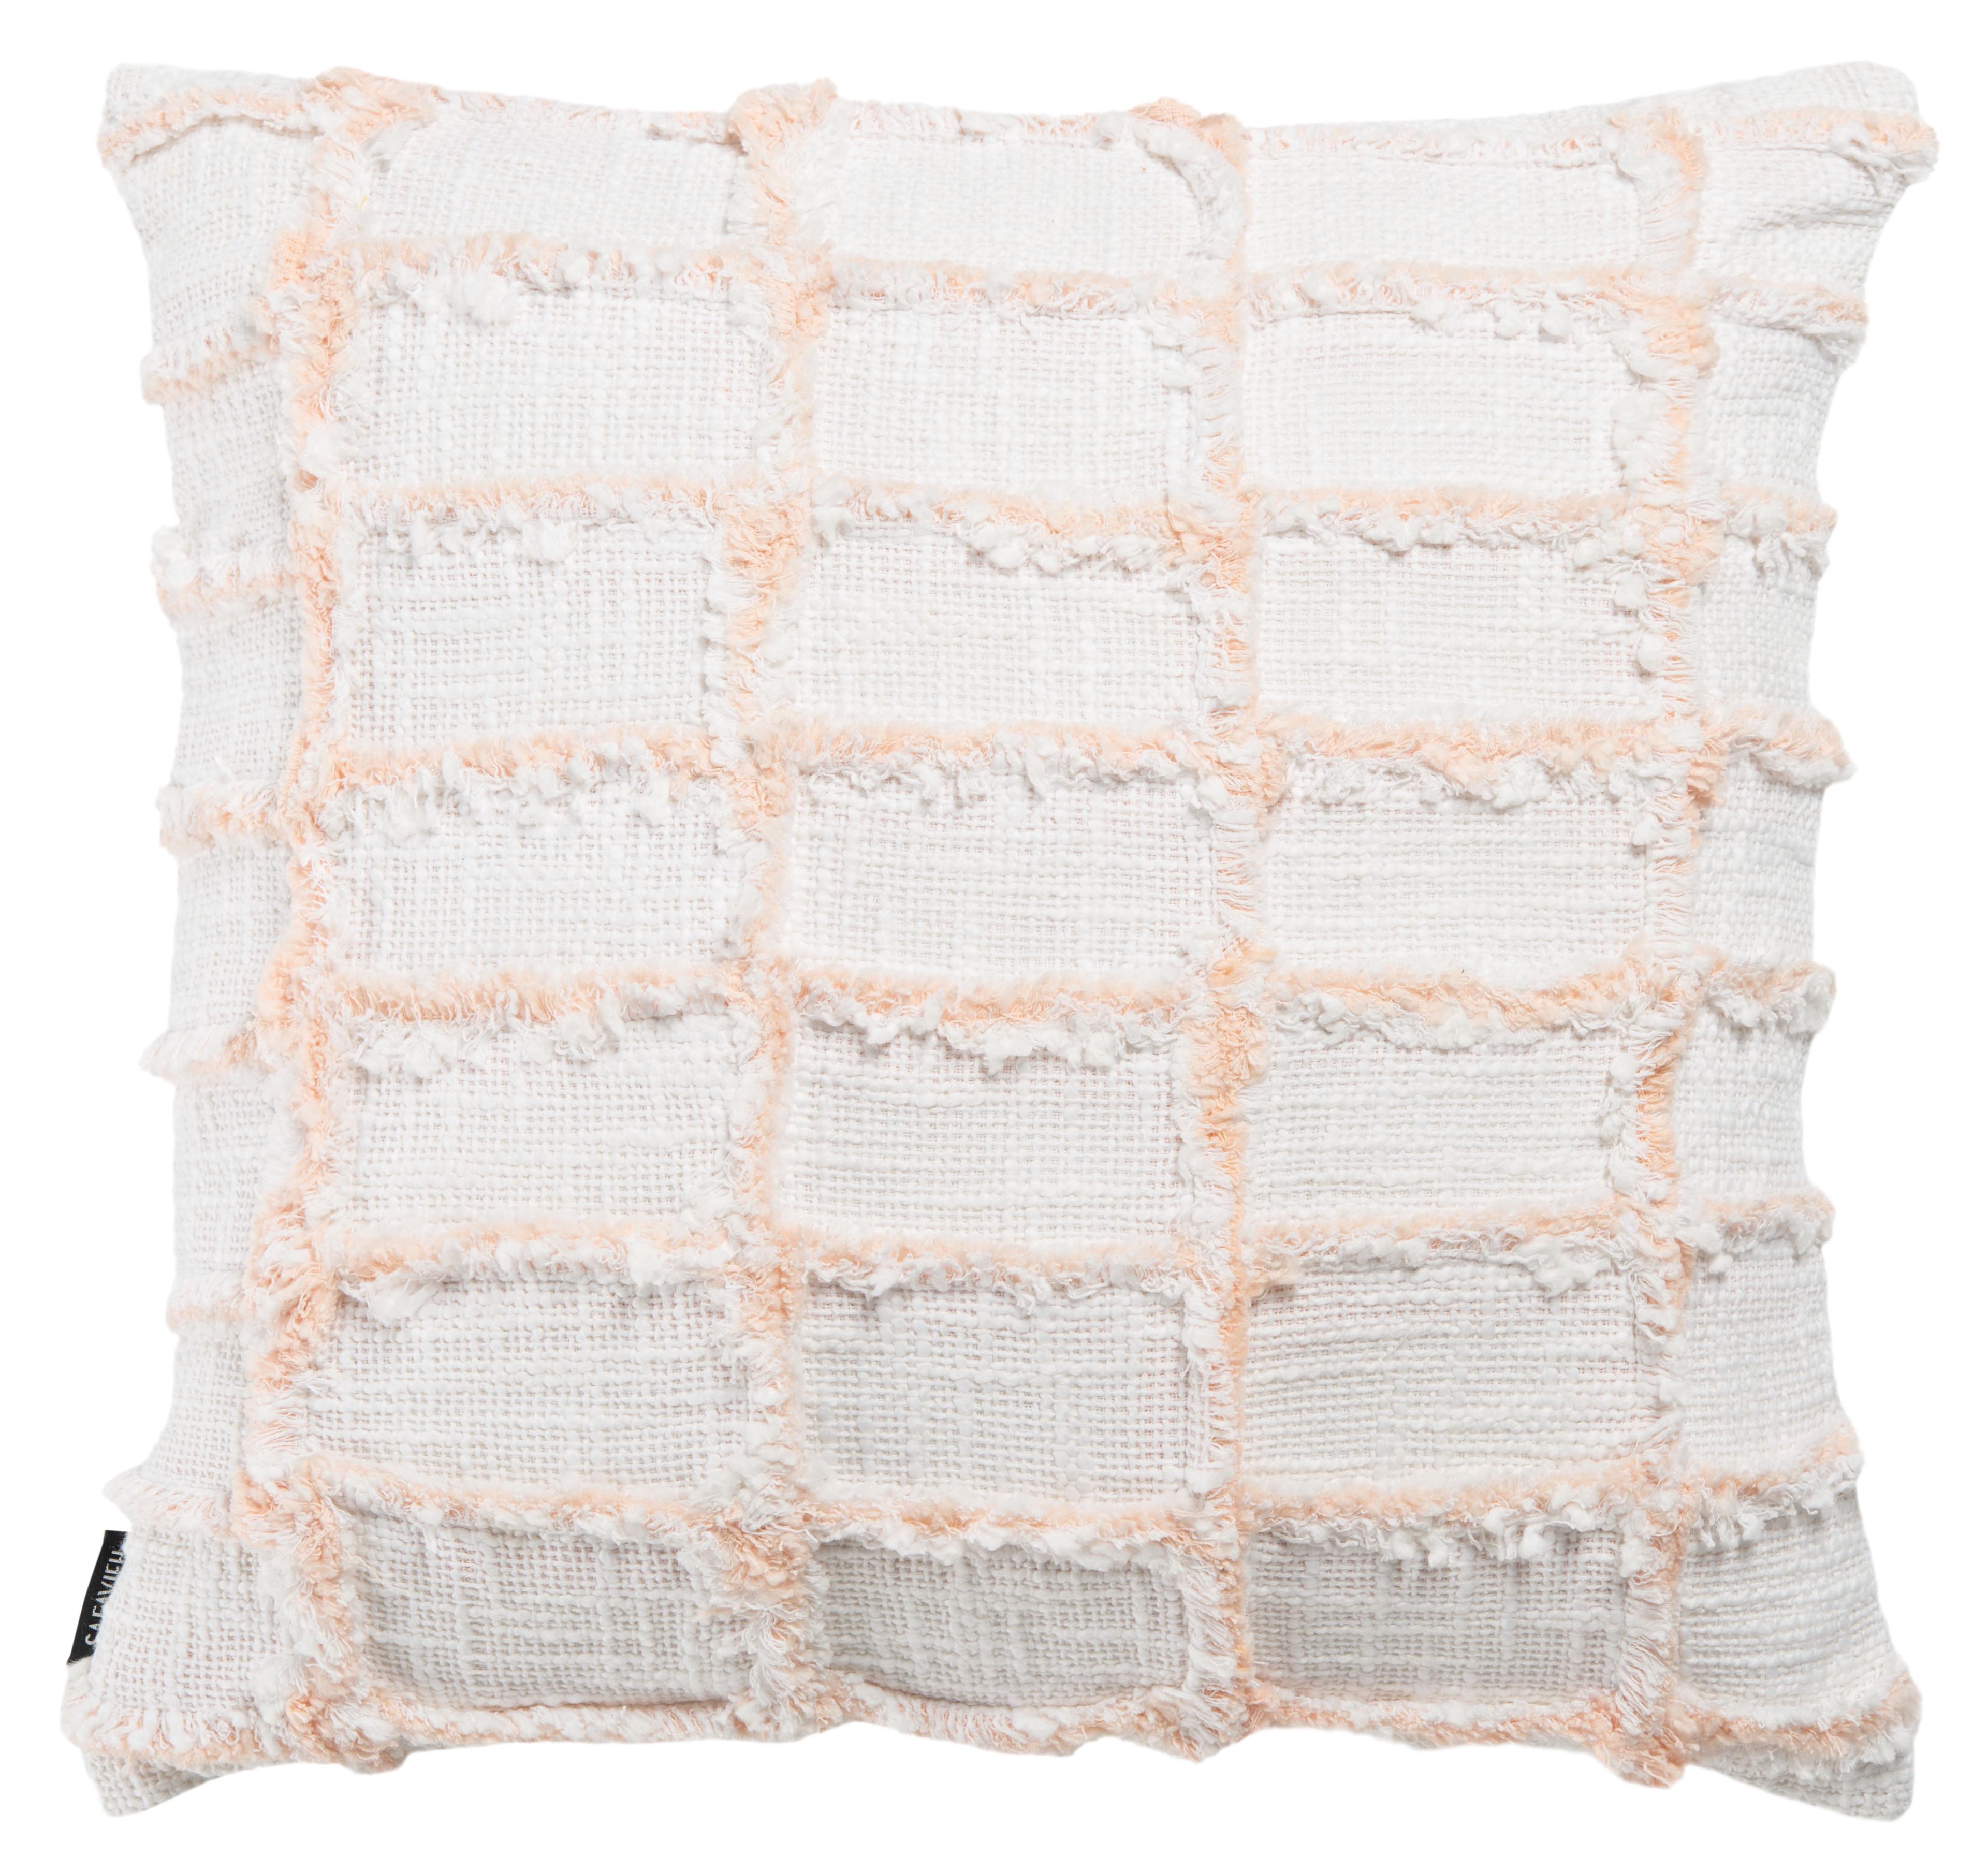 Lonis 18" White and Pink Fringed Cotton Accent Pillow